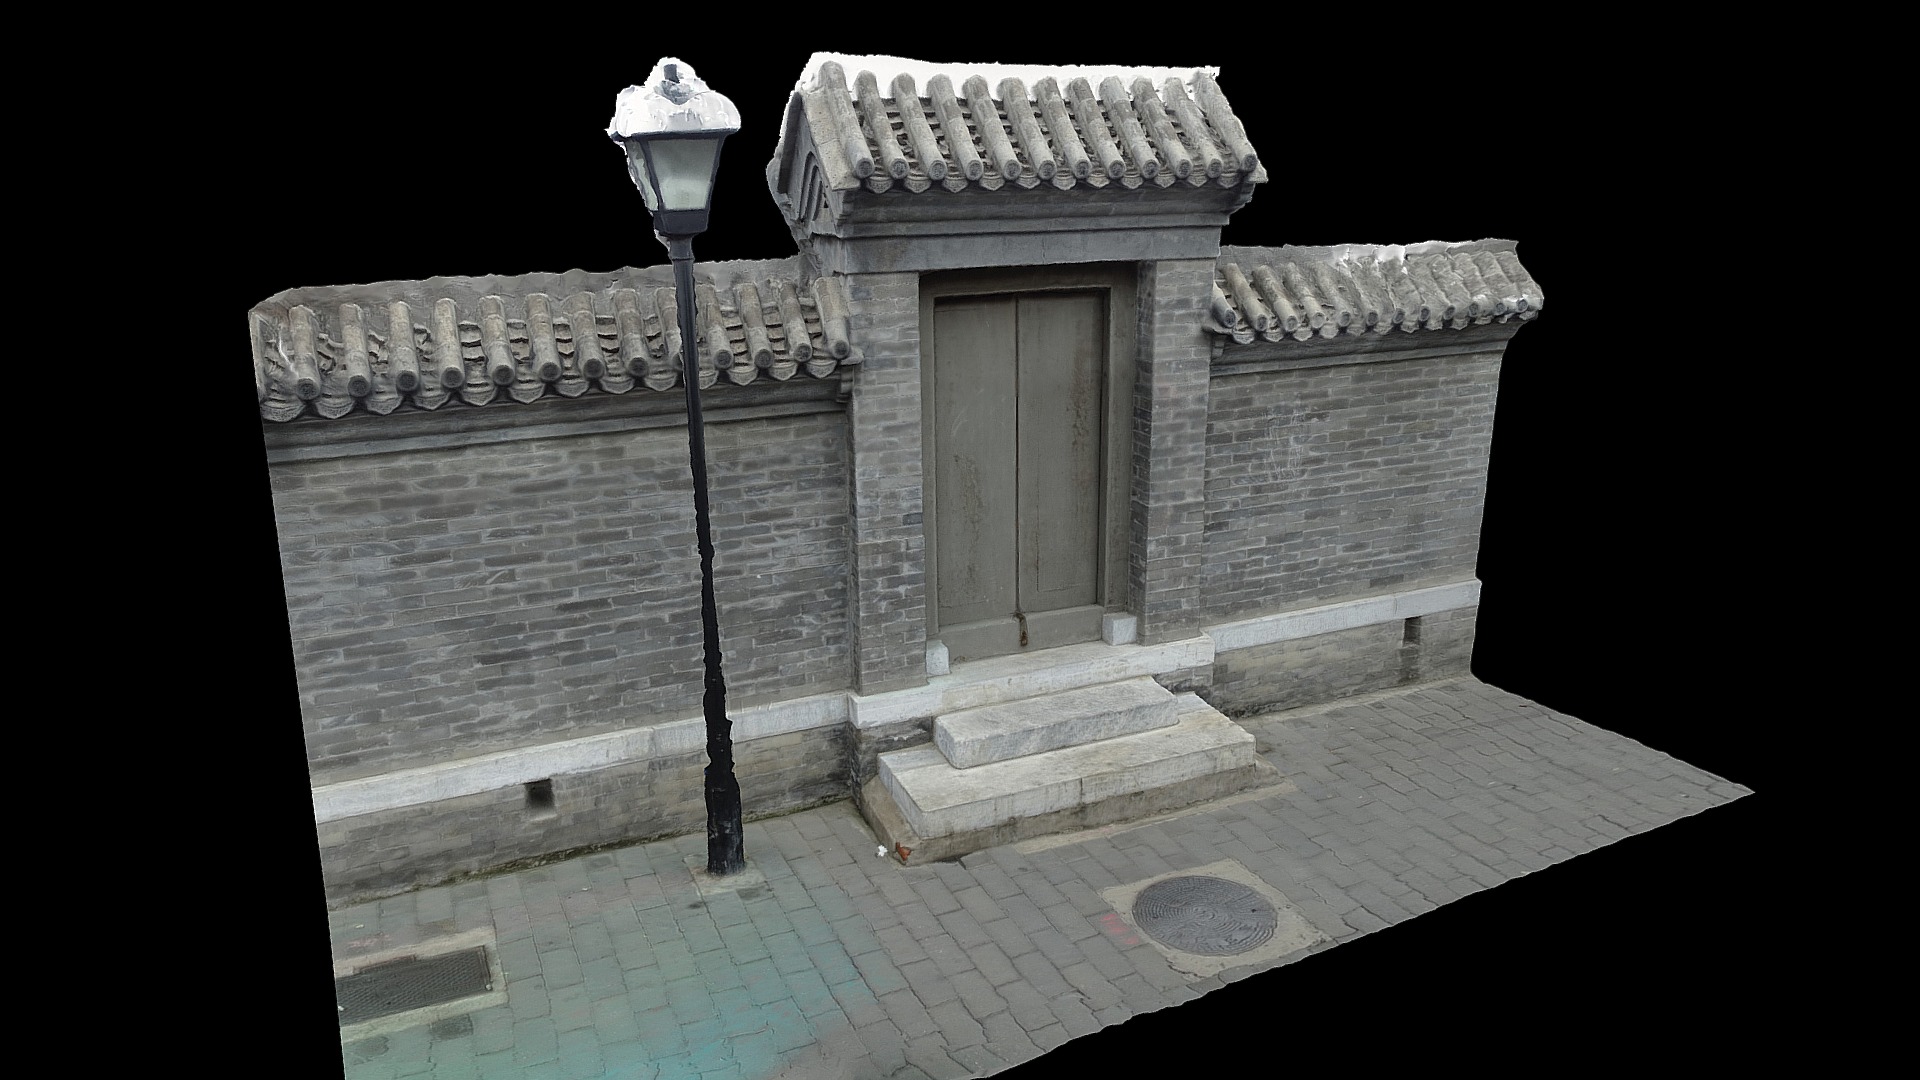 3D model 2016-10 – Beijing 12 - This is a 3D model of the 2016-10 - Beijing 12. The 3D model is about a stone building with a lamp post.